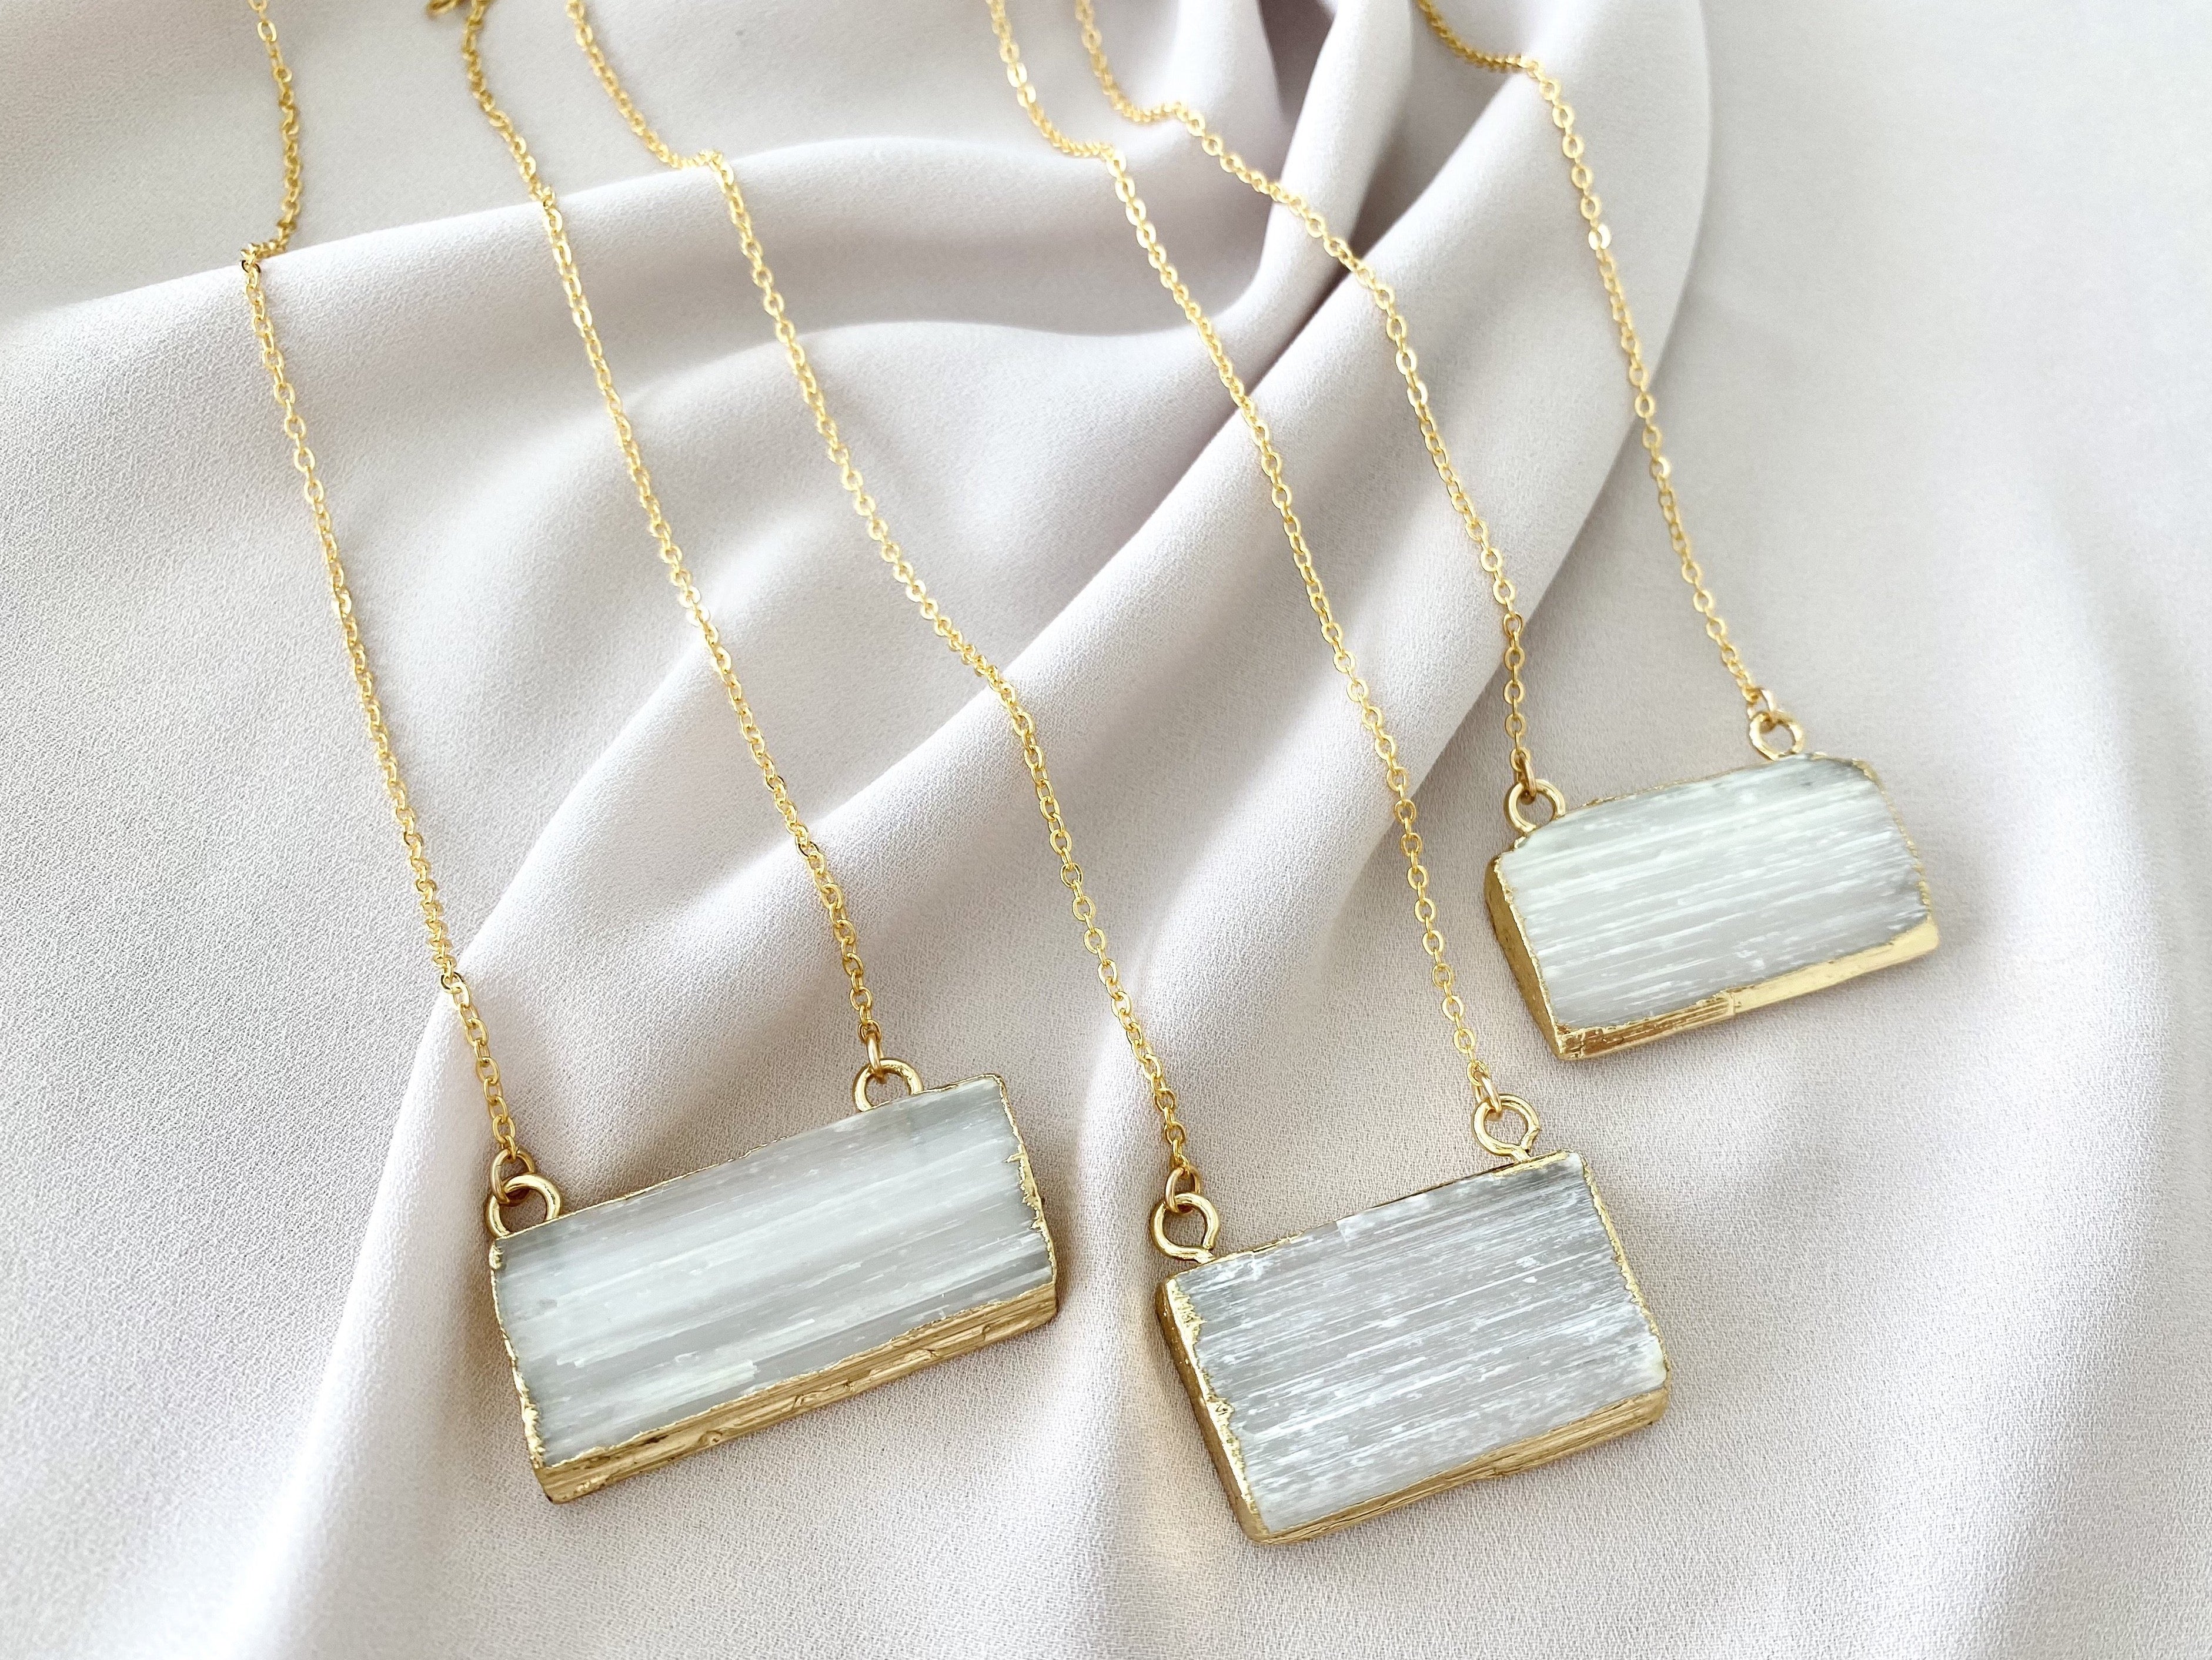 Chunky Selenite Rectangle Pendant Necklace - Gold Filled Chain